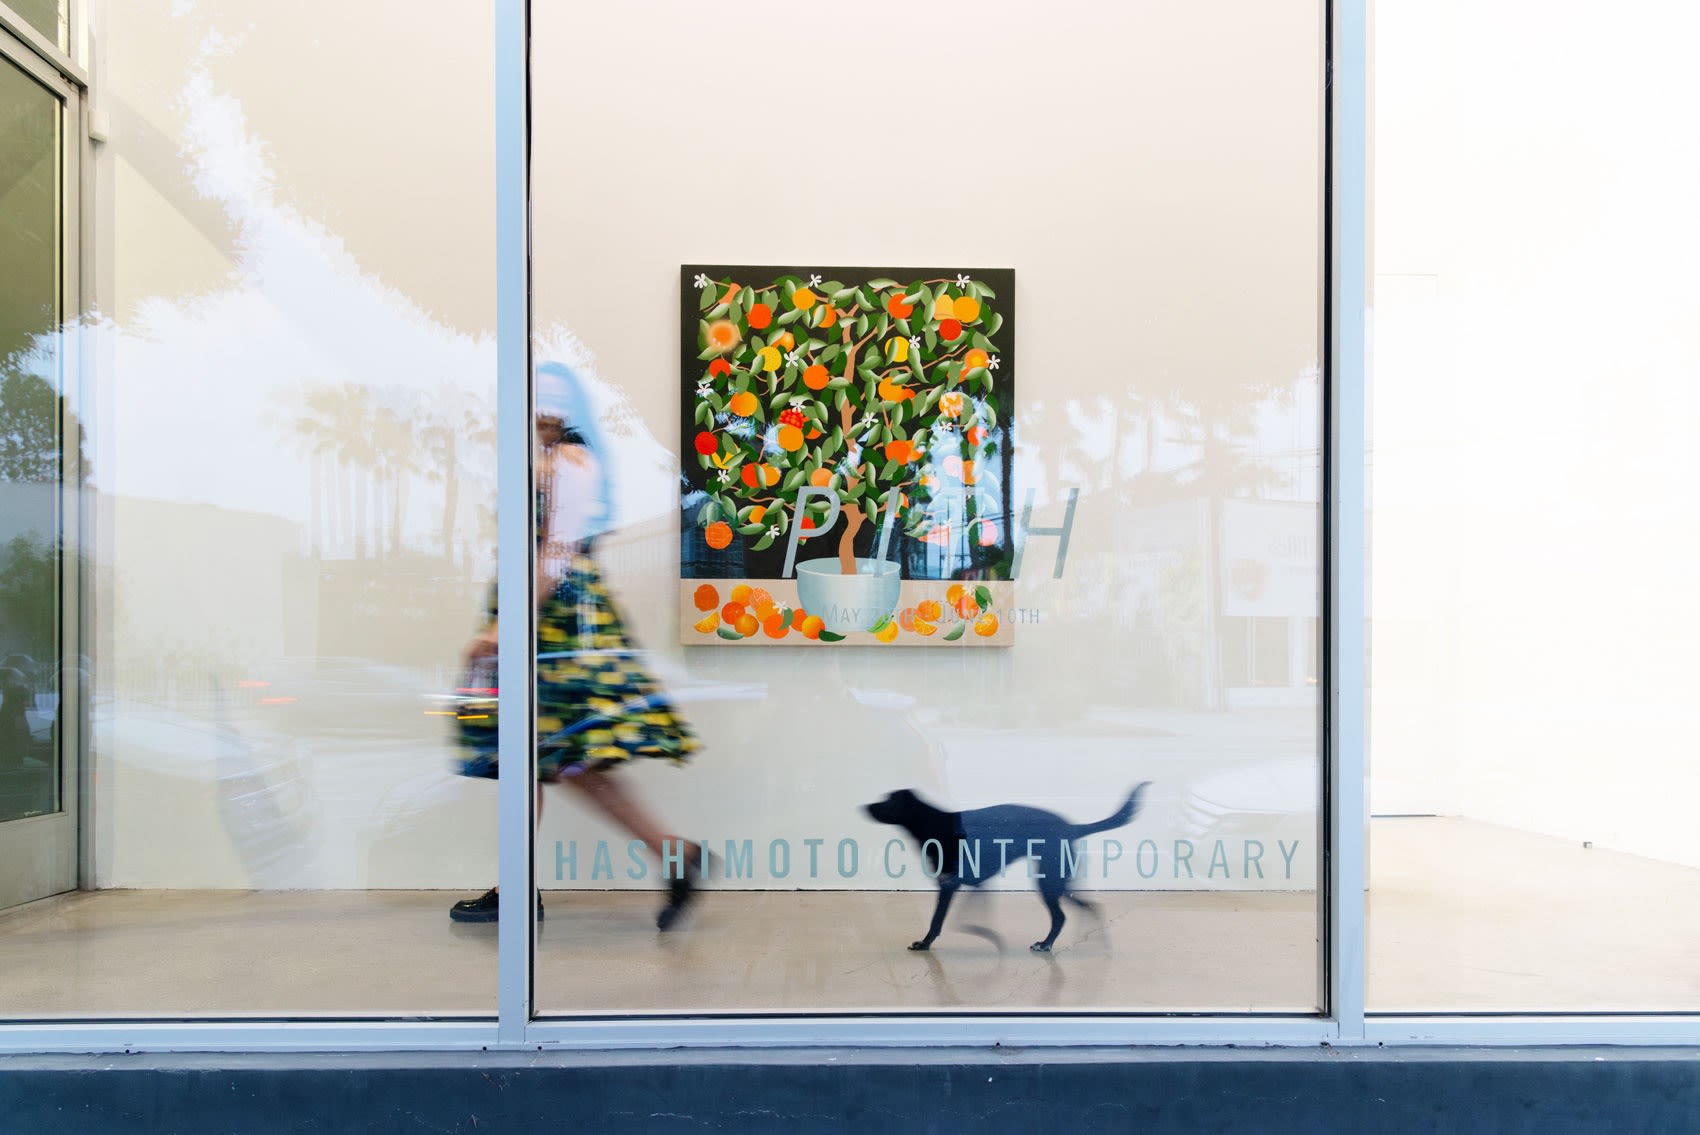 Photo of the front window at Hashimoto Contemporary Los Angeles with someone walking by with a small black dog